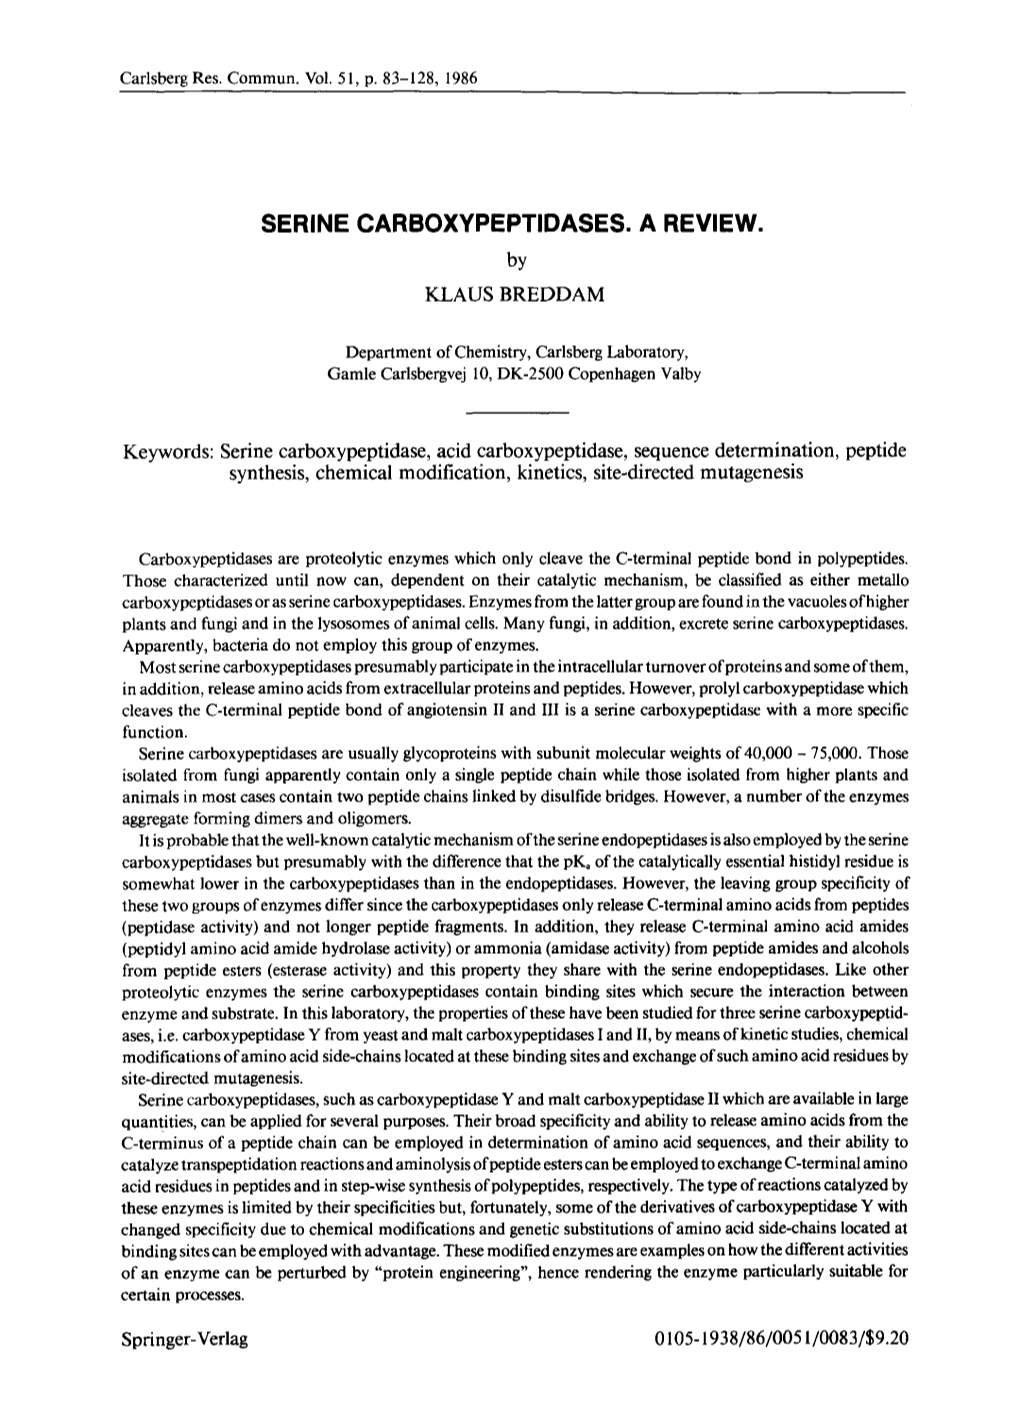 Serine Carboxypeptidases. a Review